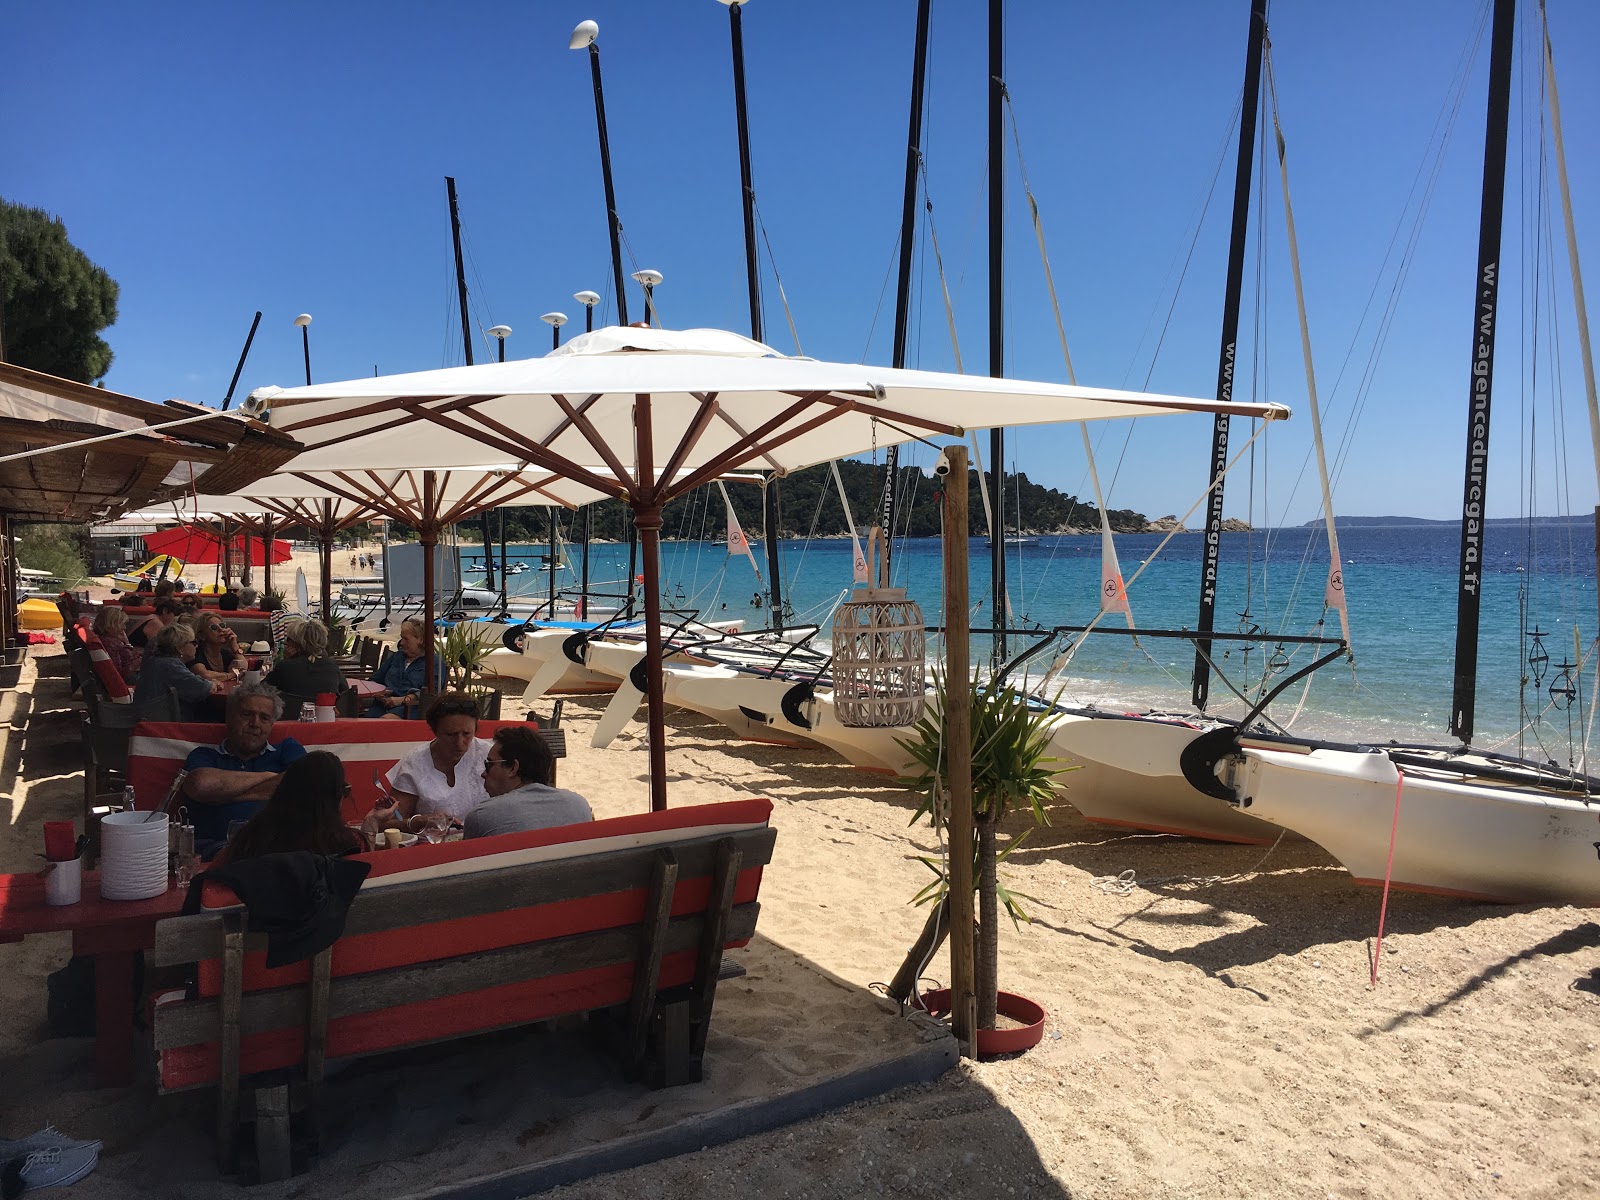 Photo of Le Cavaliere beach - popular place among relax connoisseurs